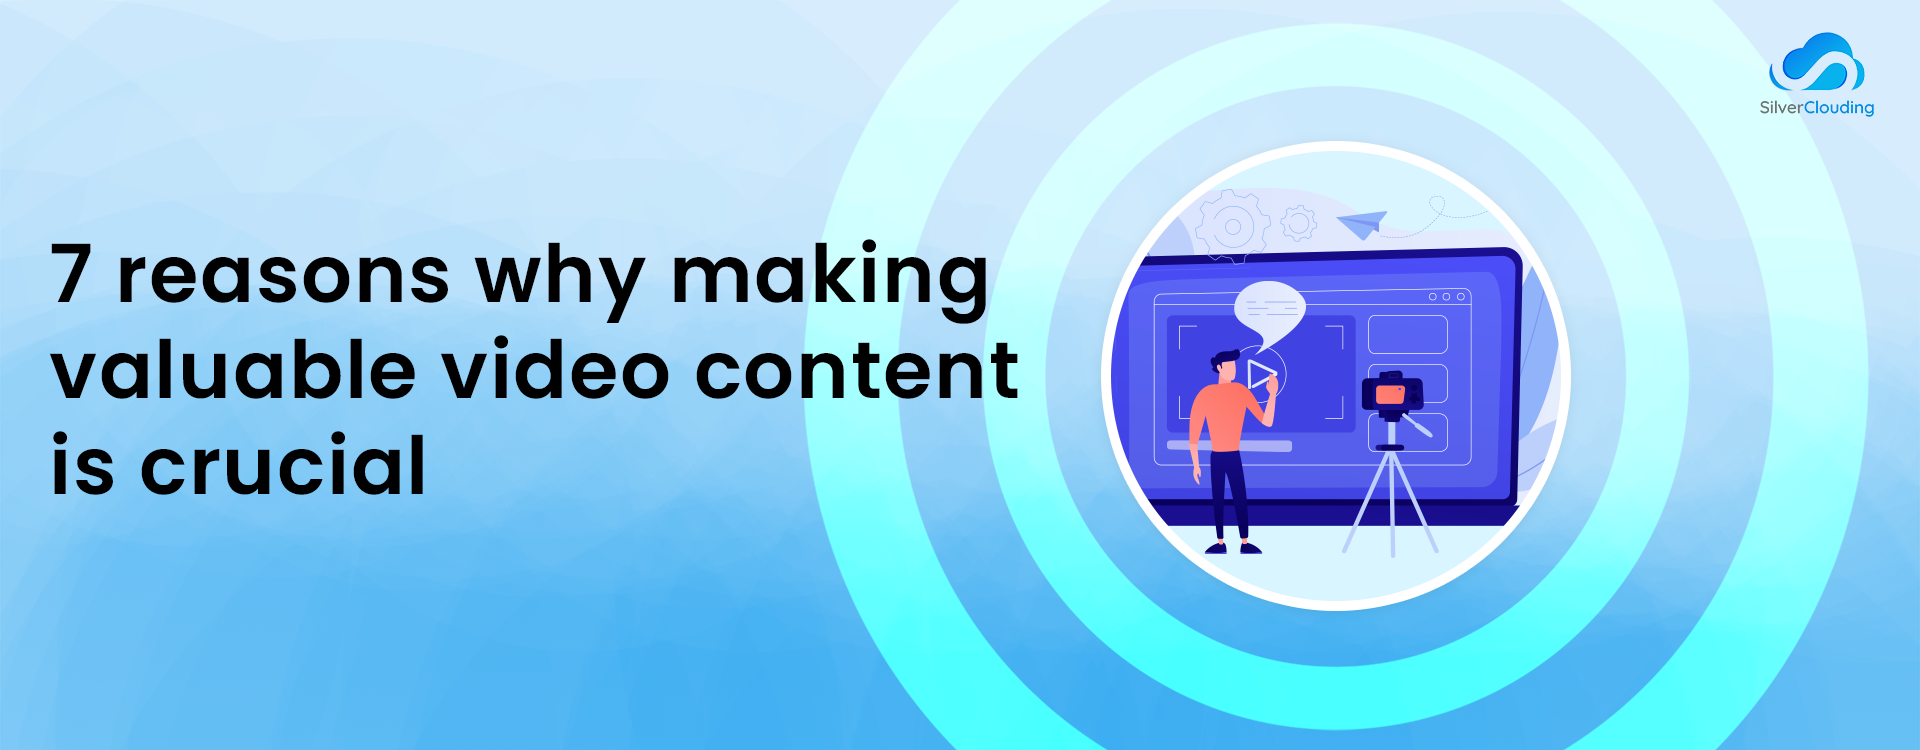 7 reasons why making valuable video content is crucial